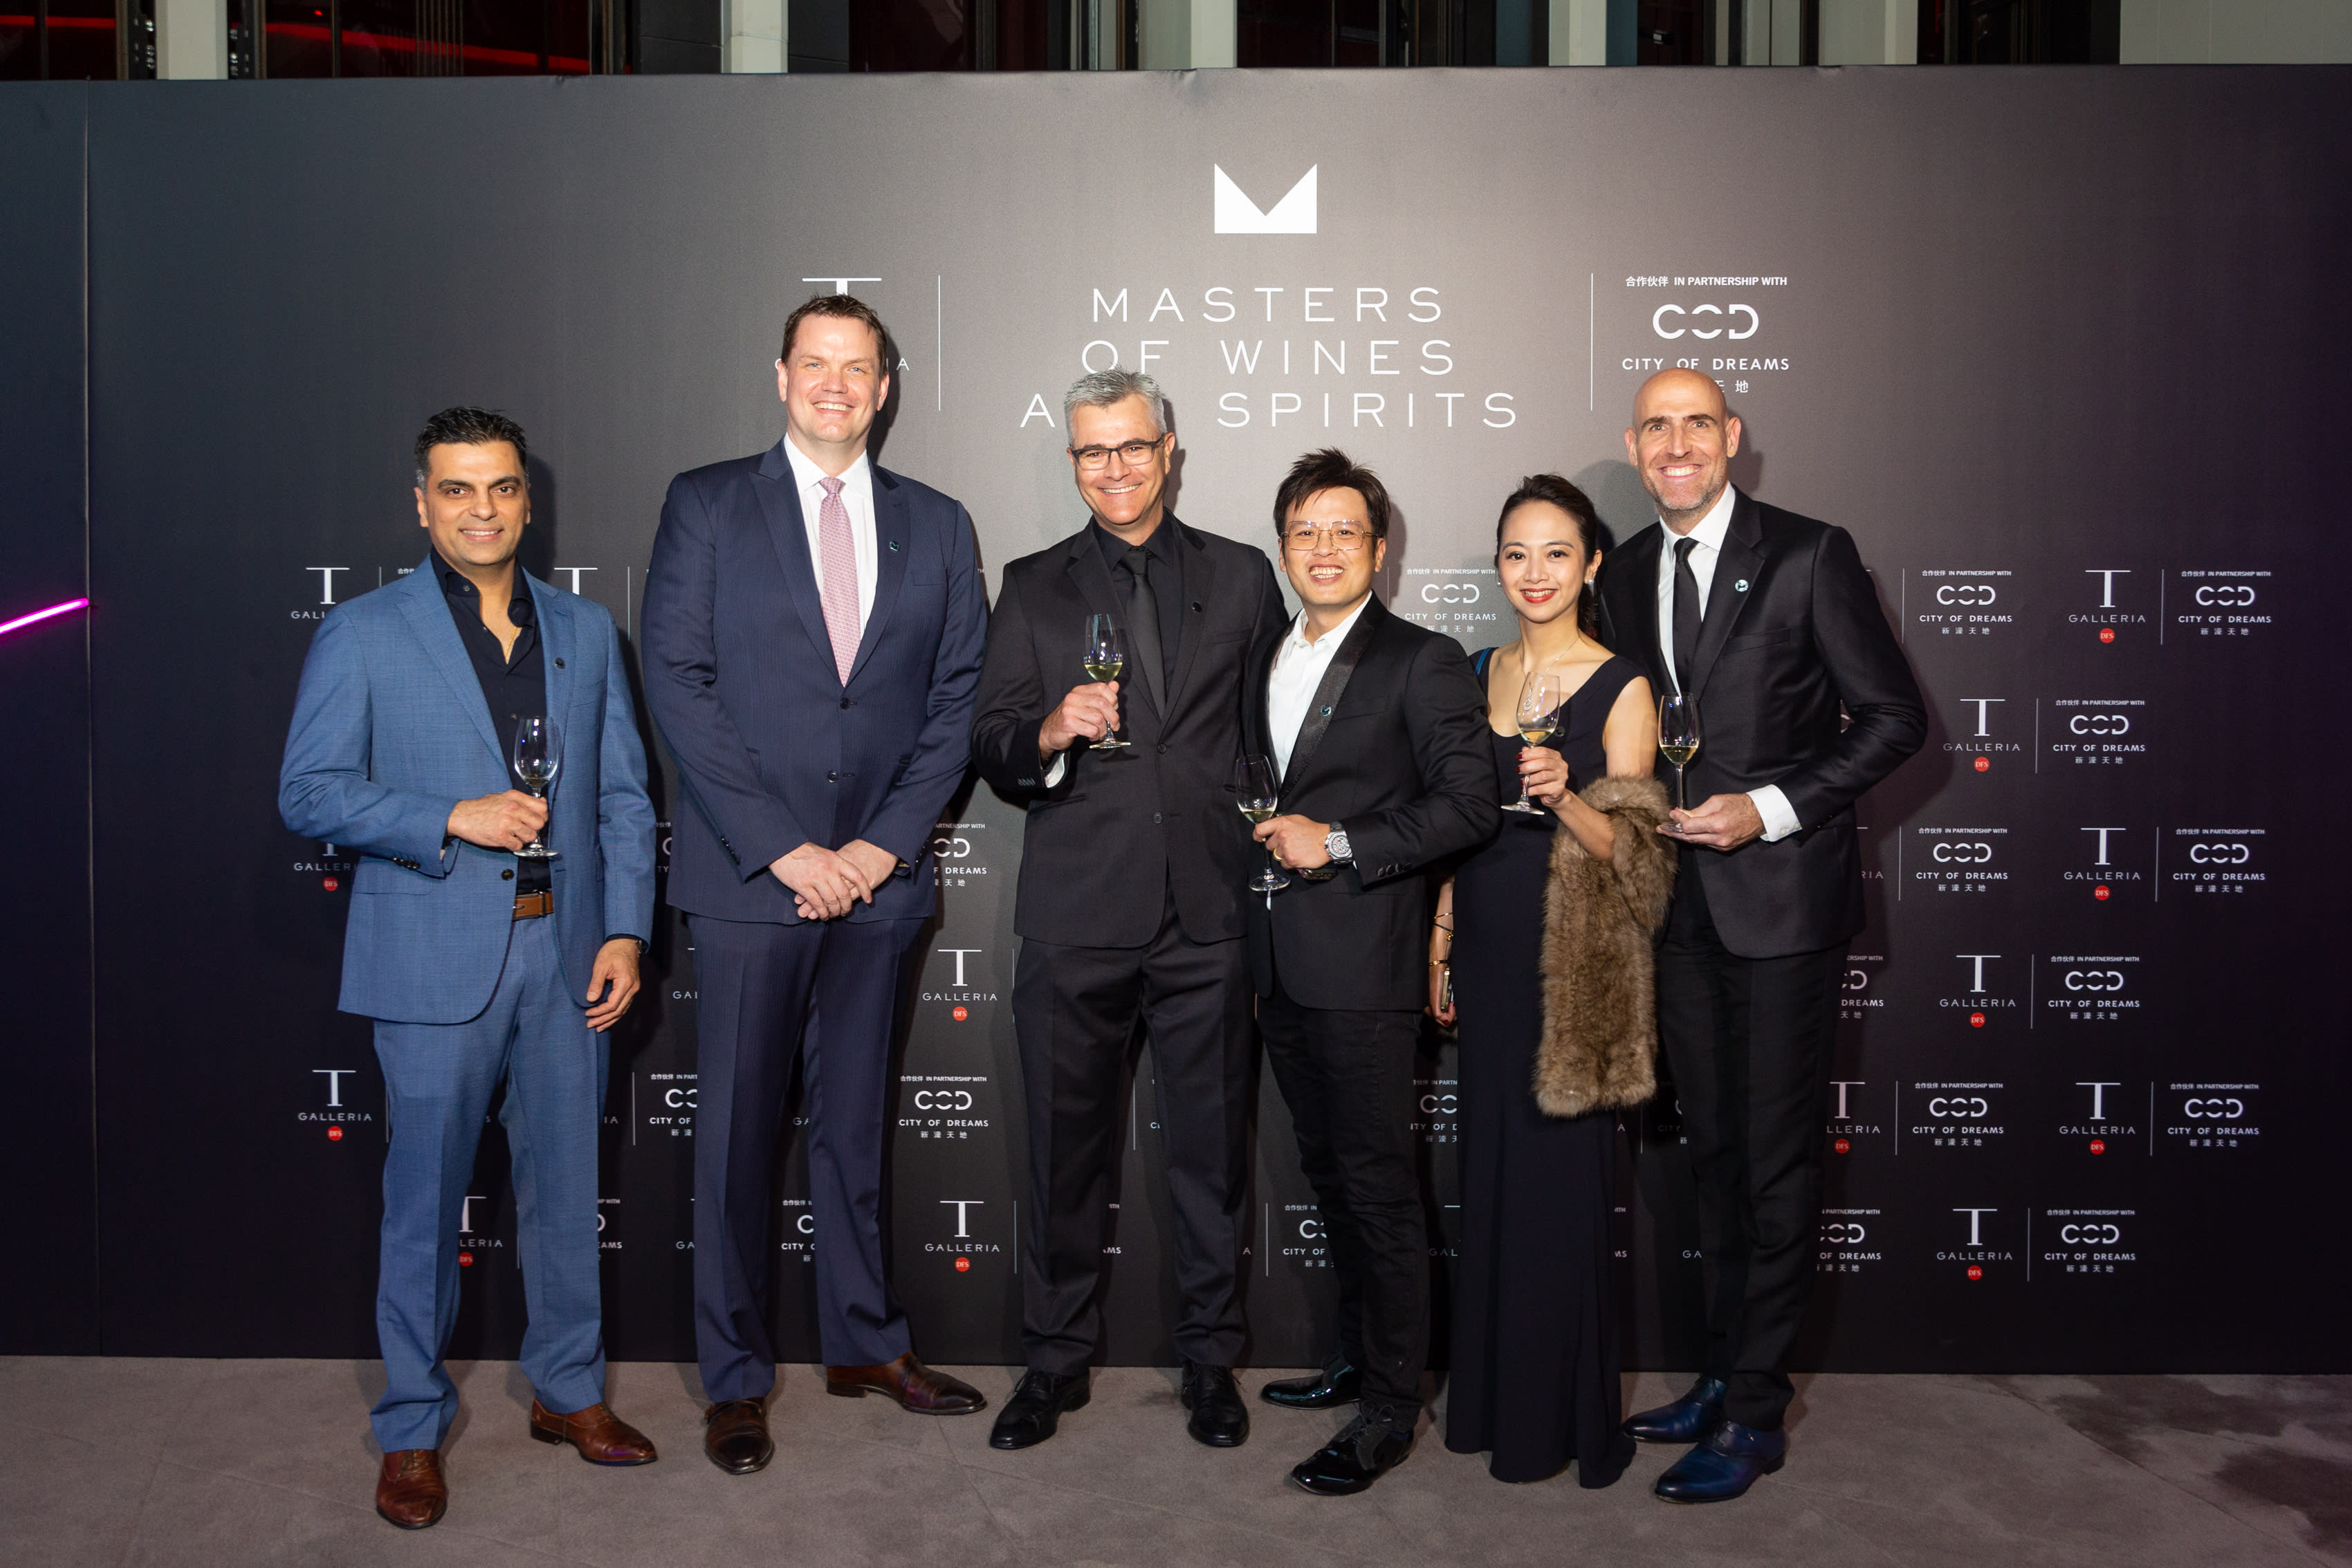 DFS launches annual beauty campaign with metaverse World and in